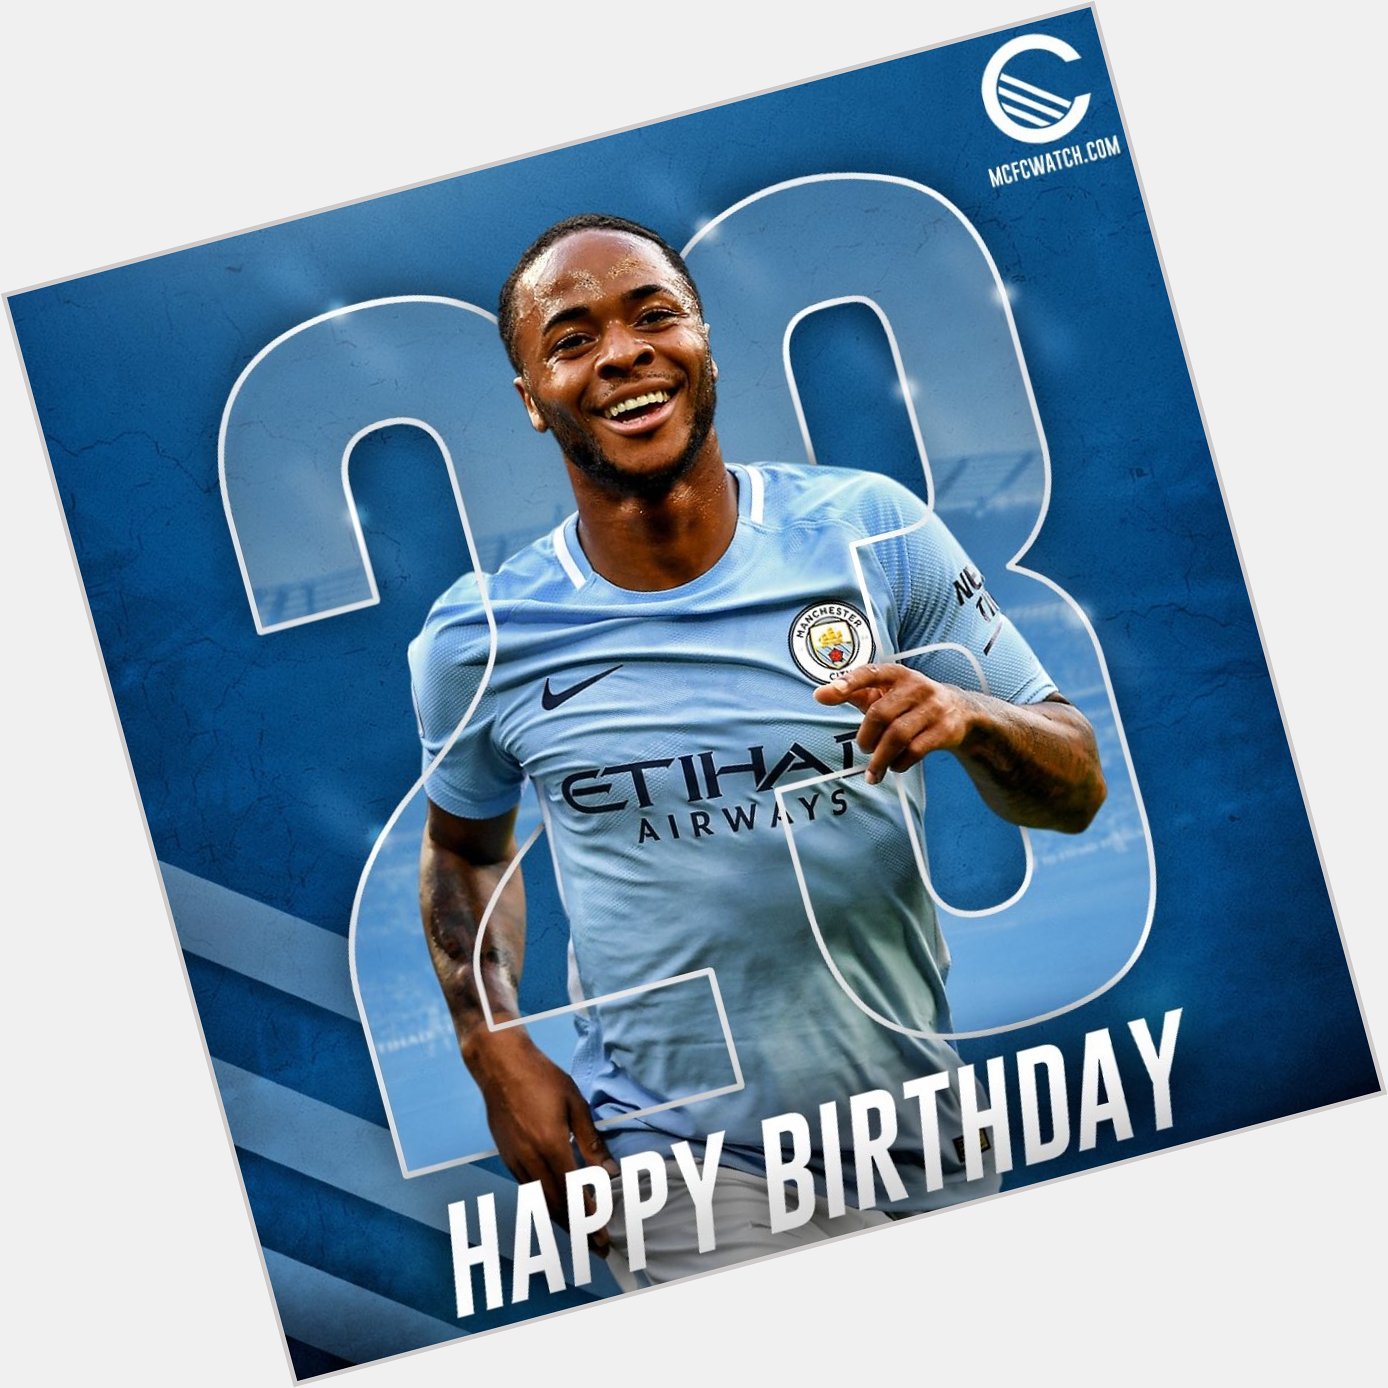 Happy Birthday to Raheem Sterling, who turns 23 today! 